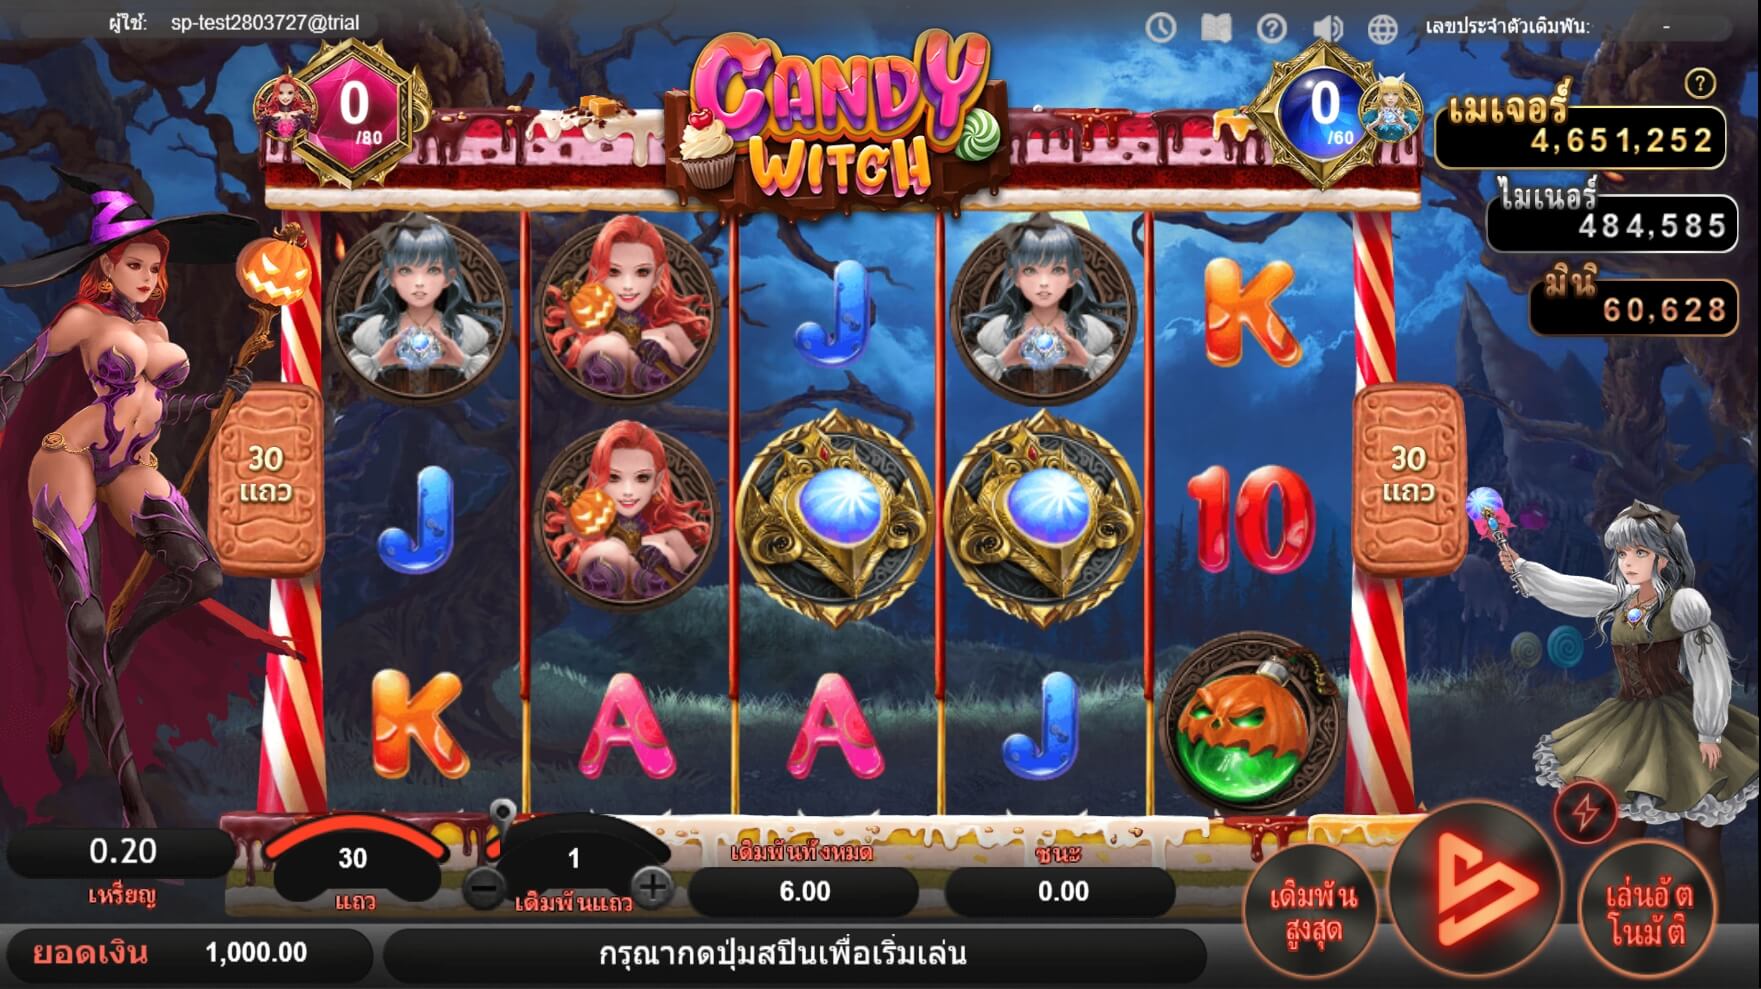 Candy Witch Simple Play เครดิตฟรี slotxo119